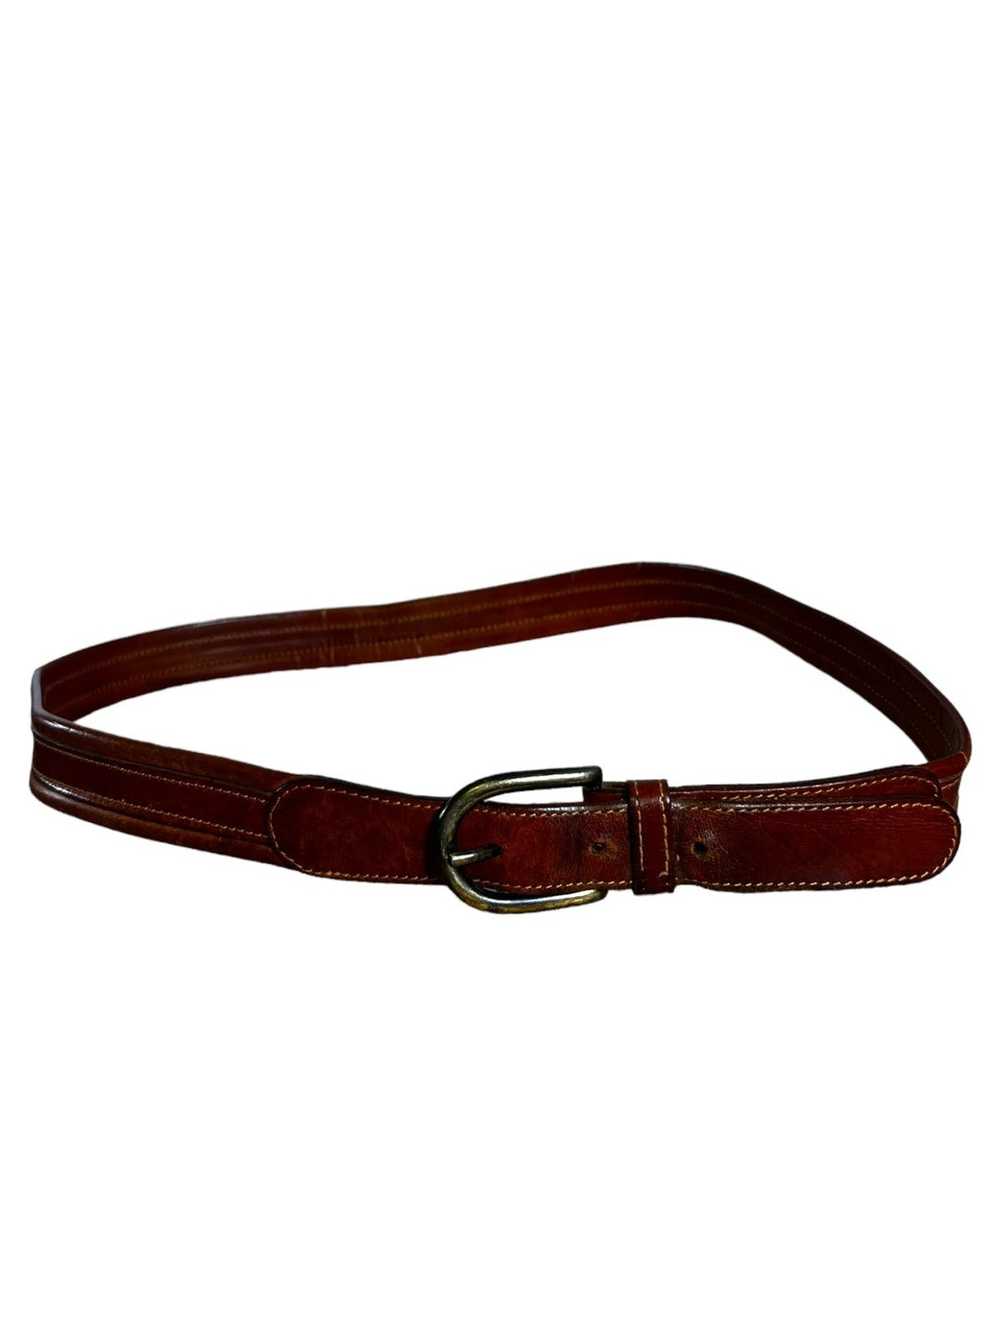 Jaeger Leather Belt Made in Italy - image 1